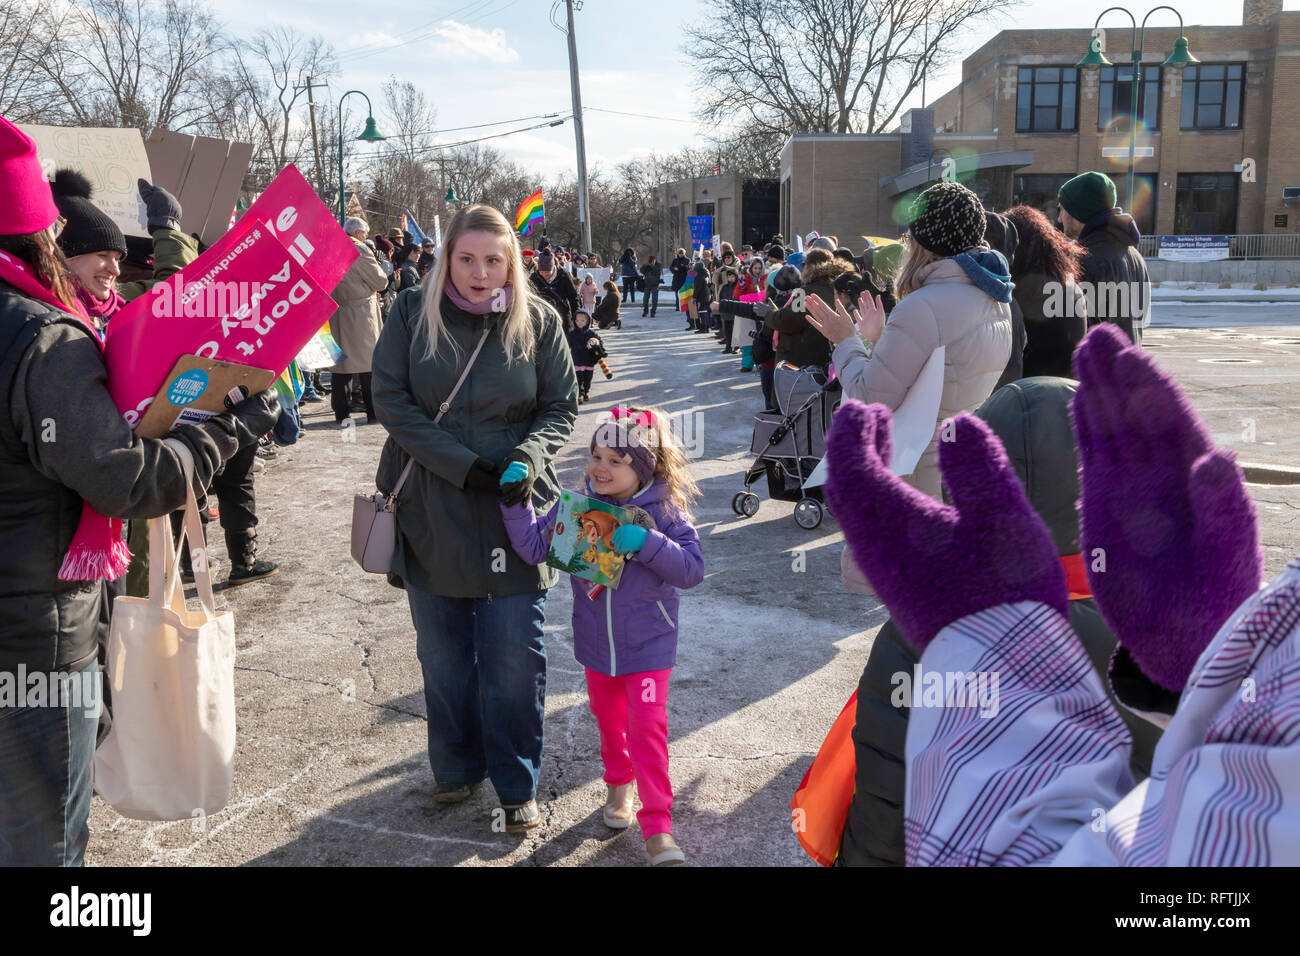 Huntington Woods, Michigan USA - 26 January 2019 - Opponents and supporters of Drag Queen Storytime at the Huntington Woods Public Library rallied outside the suburban Detroit library. While a half dozen members of a conservative Christian group, Warriors for Christ, opposed the popular program, two hundred local residents welcomed children to Storytime. Credit: Jim West/Alamy Live News Stock Photo